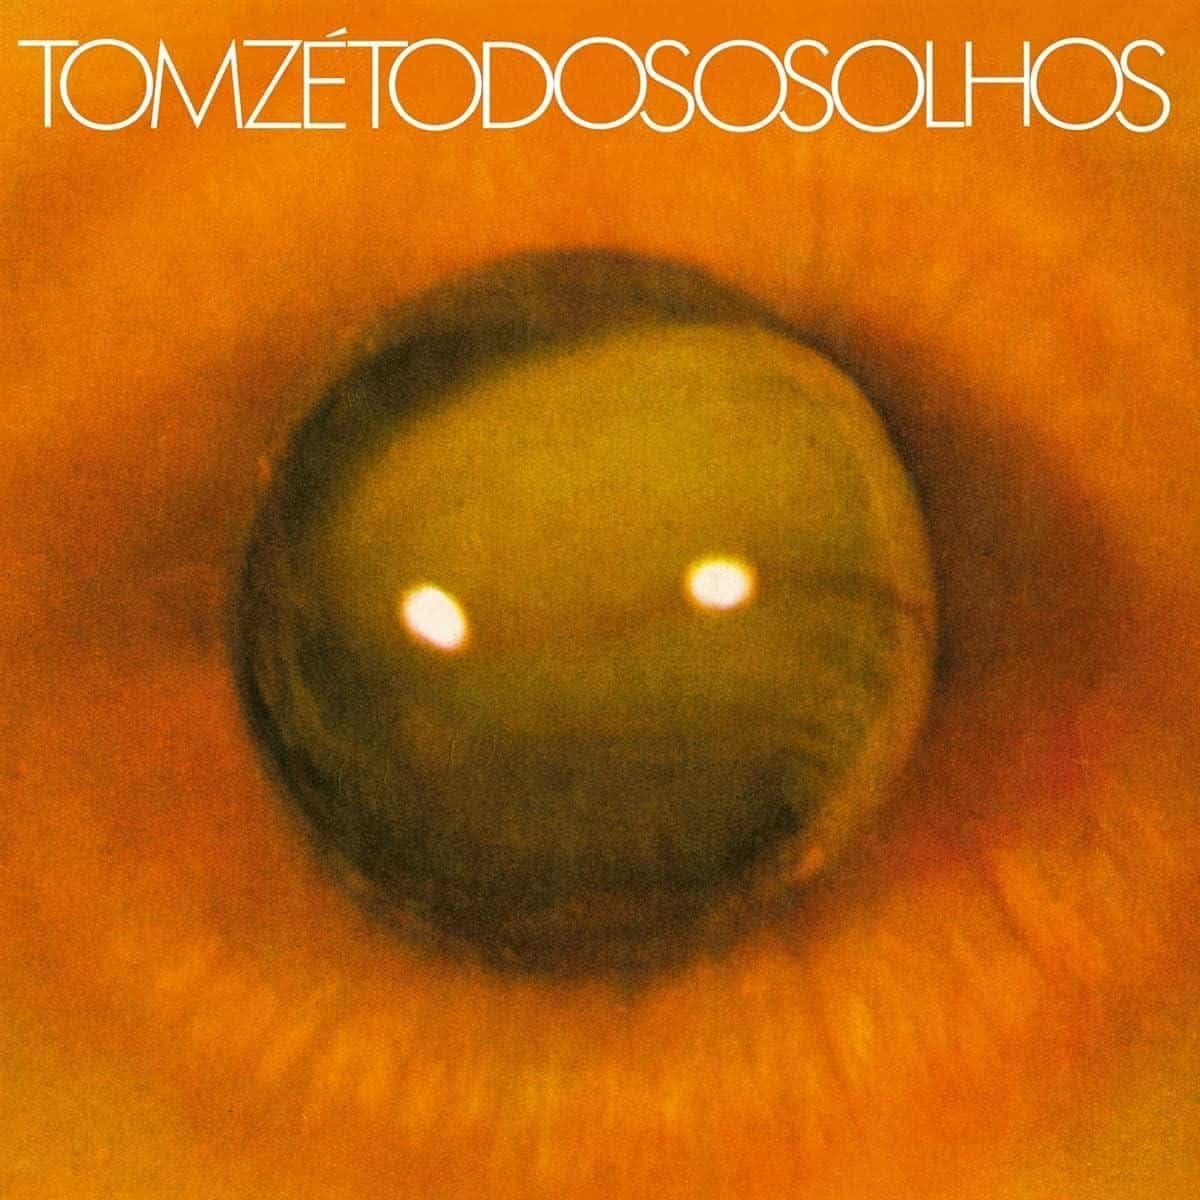 PRE-ORDER: 'Todos Os Olhos' by Tom Zé One of the best works from MPB singer-songwriter Tom Zé turns fifty this year. It's getting reissued by Elemental Music next month. normanrecords.com/records/194646…